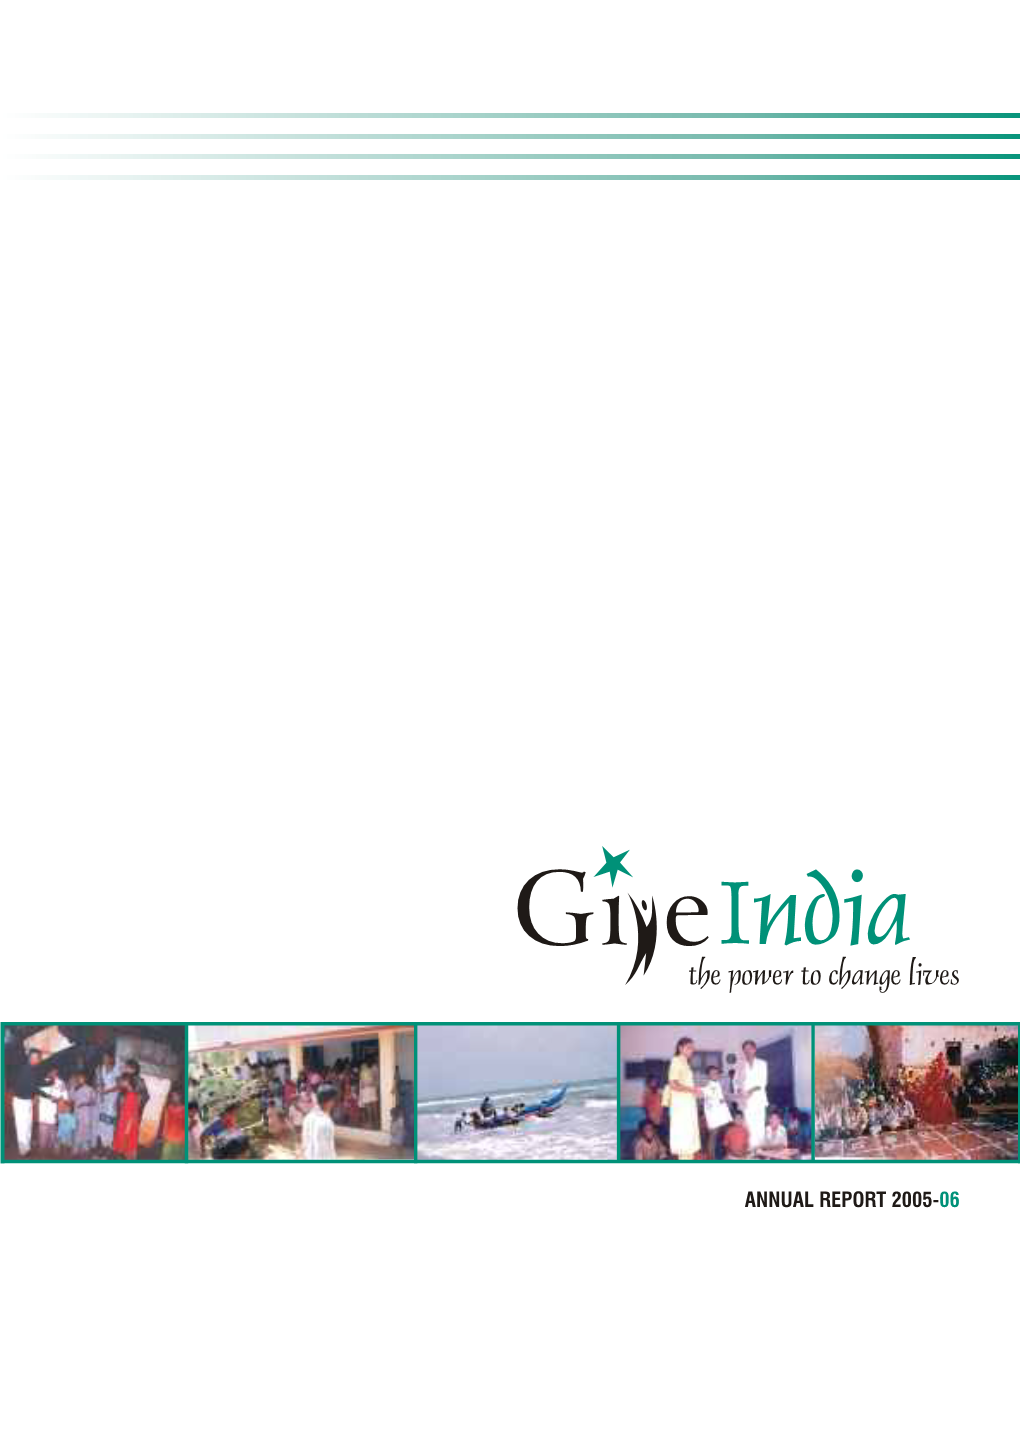 ANNUAL REPORT 2005-06 About Giveindia